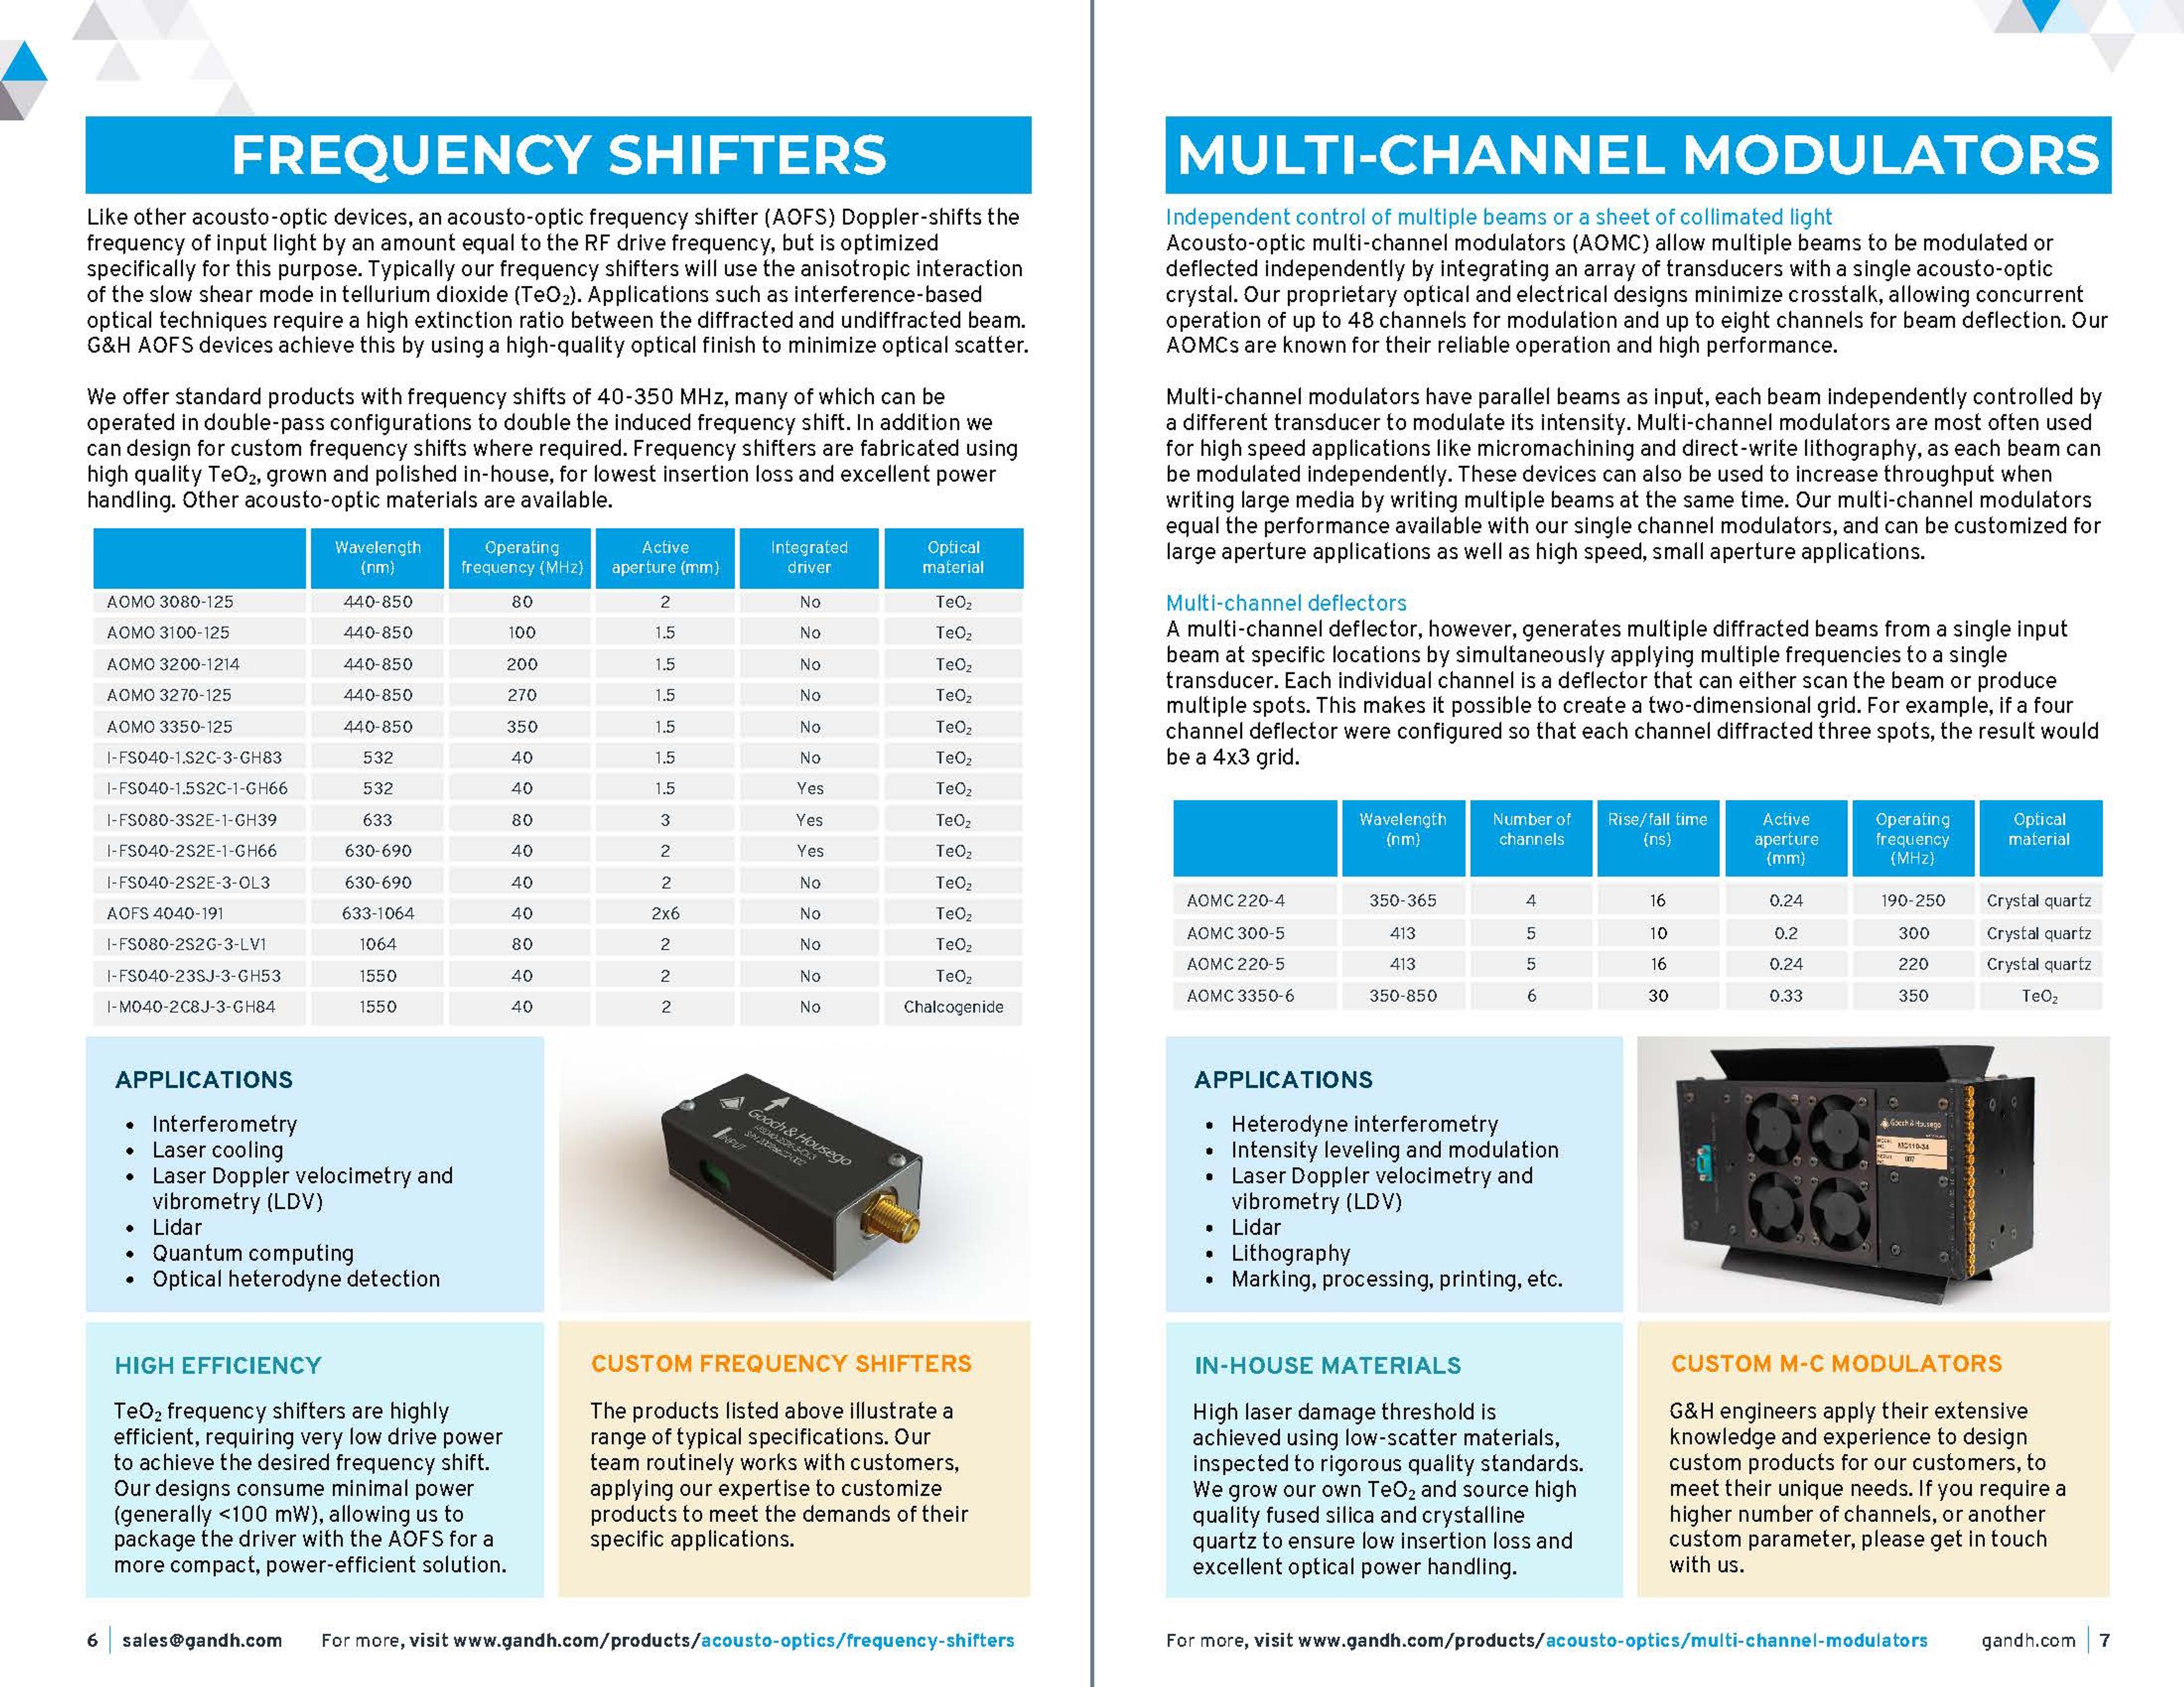 G&H Product & Solutions Guide - Acousto-Optics Page 06-07